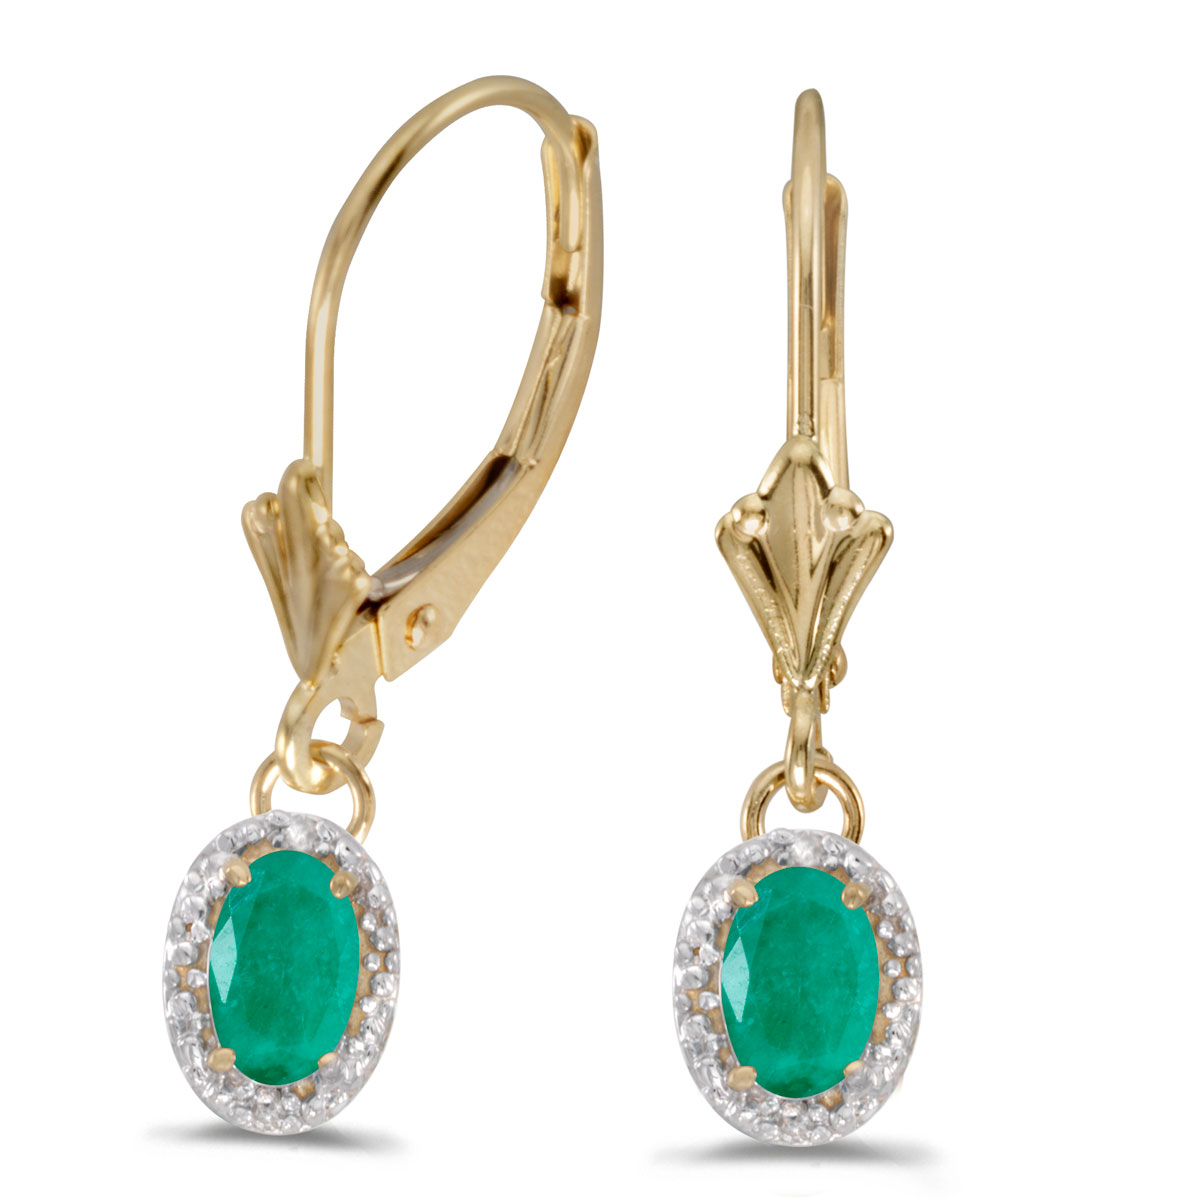 Beautiful 10k yellow gold leverback earrings with regal 6x4 mm emeralds complemented with bright ...